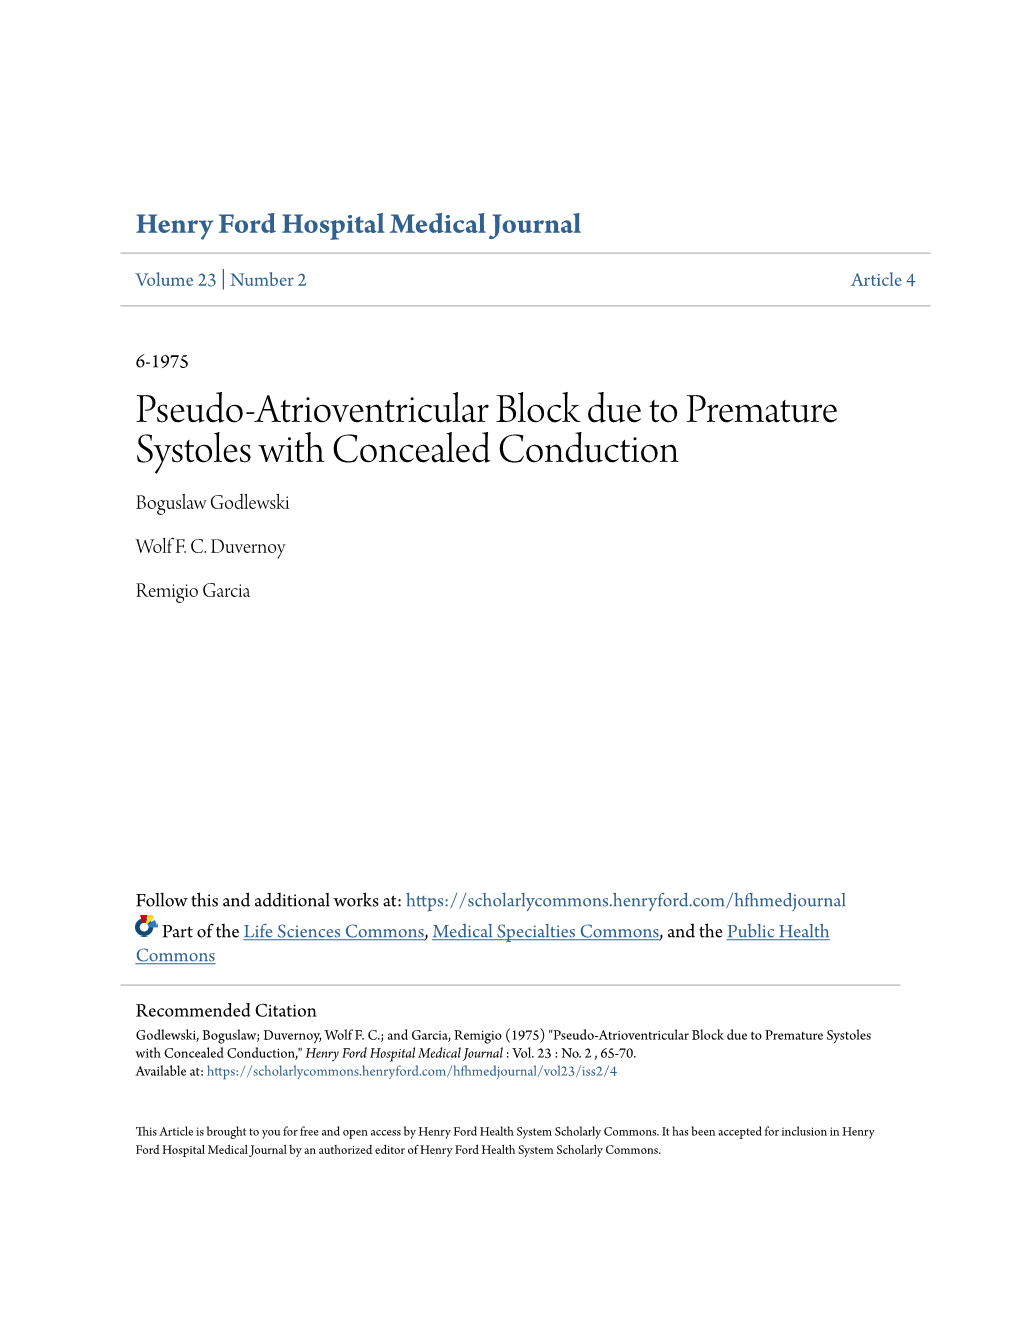 Pseudo-Atrioventricular Block Due to Premature Systoles with Concealed Conduction Boguslaw Godlewski